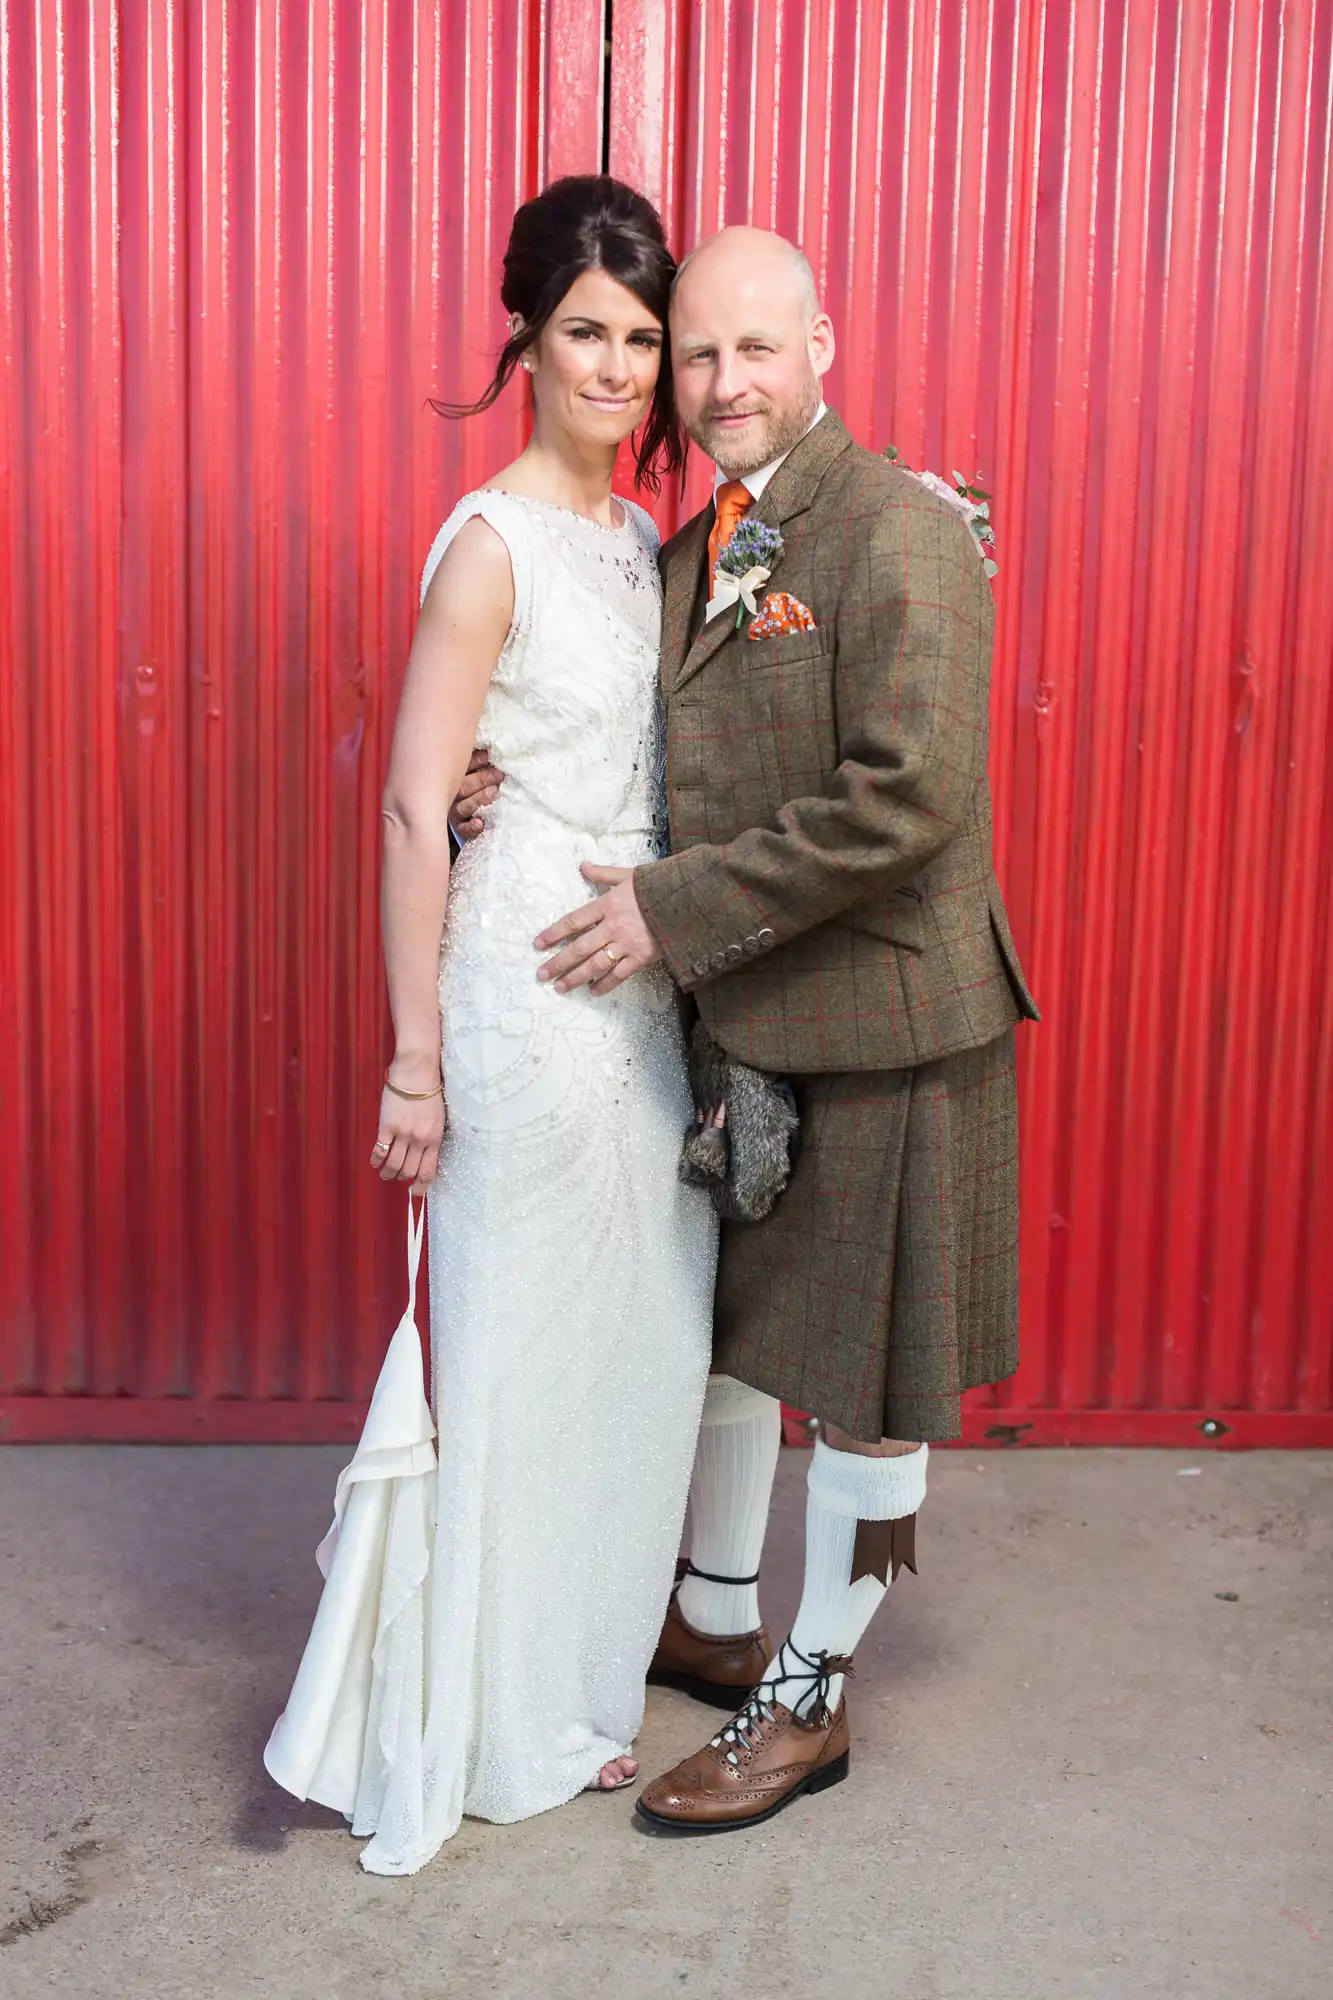 A bride in a white dress and a groom in a traditional scottish kilt and tweed jacket pose in front of a red corrugated metal wall.